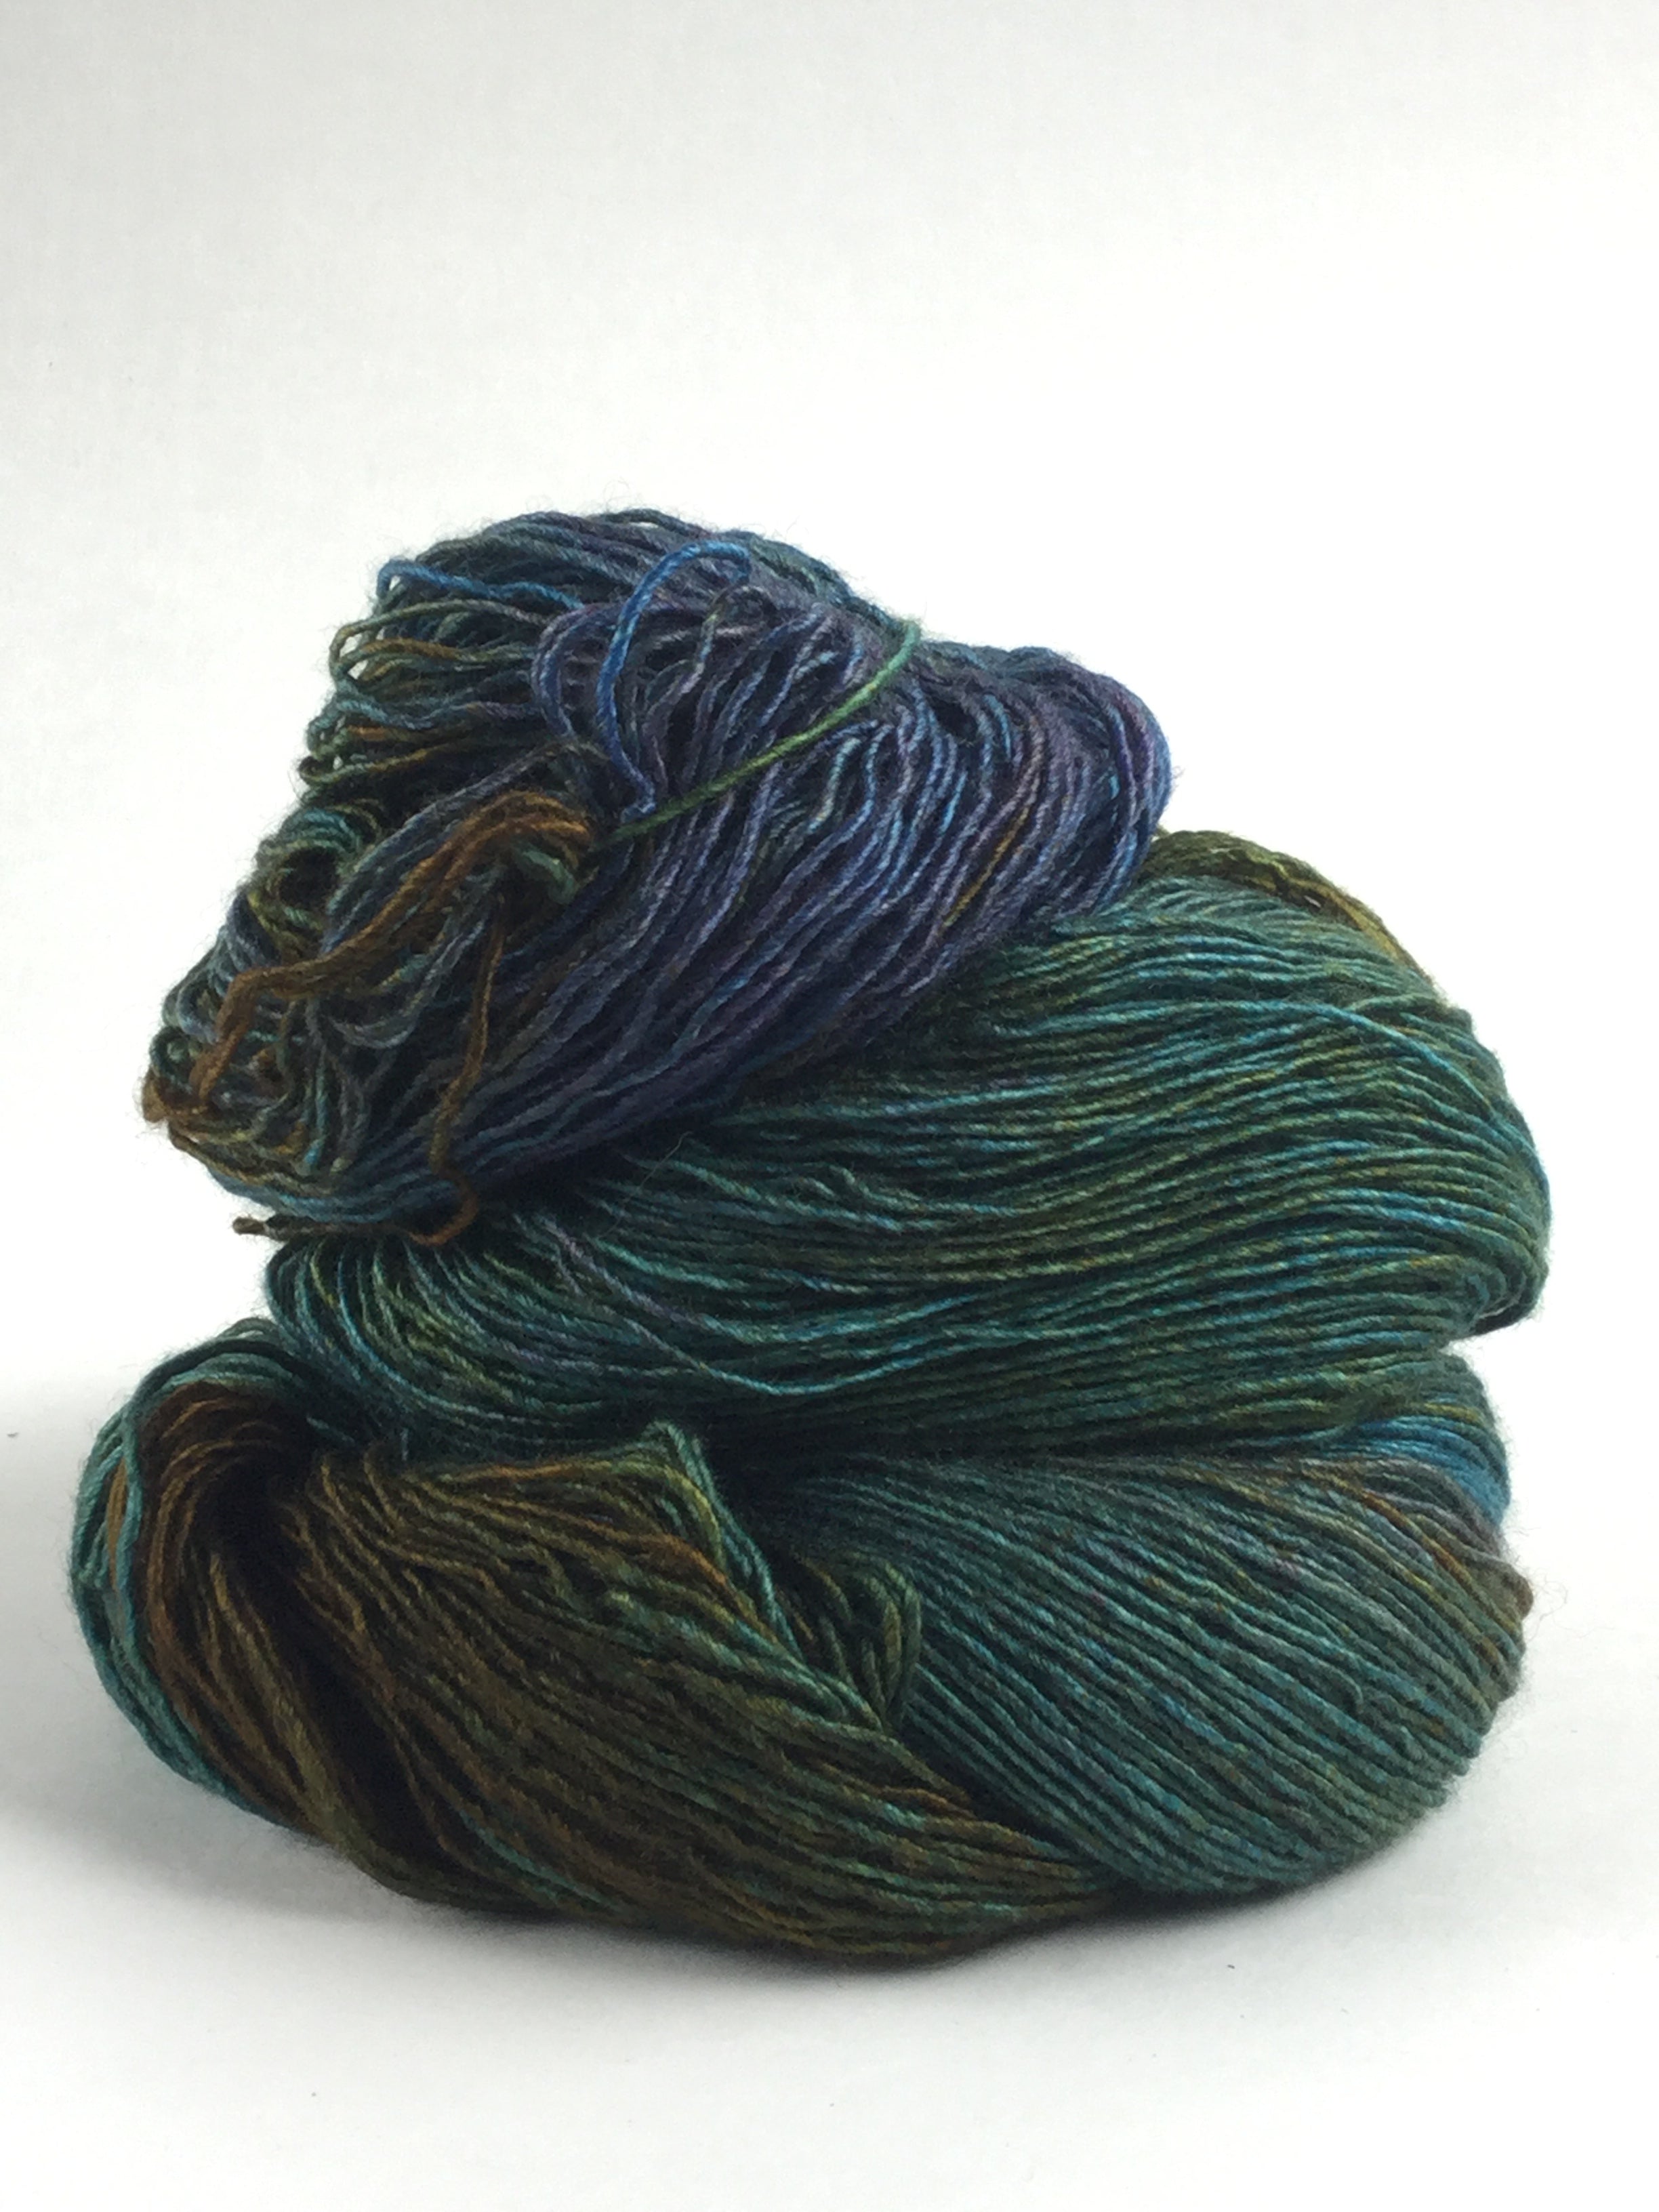 South Fork Eel River - River Silk and Merino from Tributary Yarns